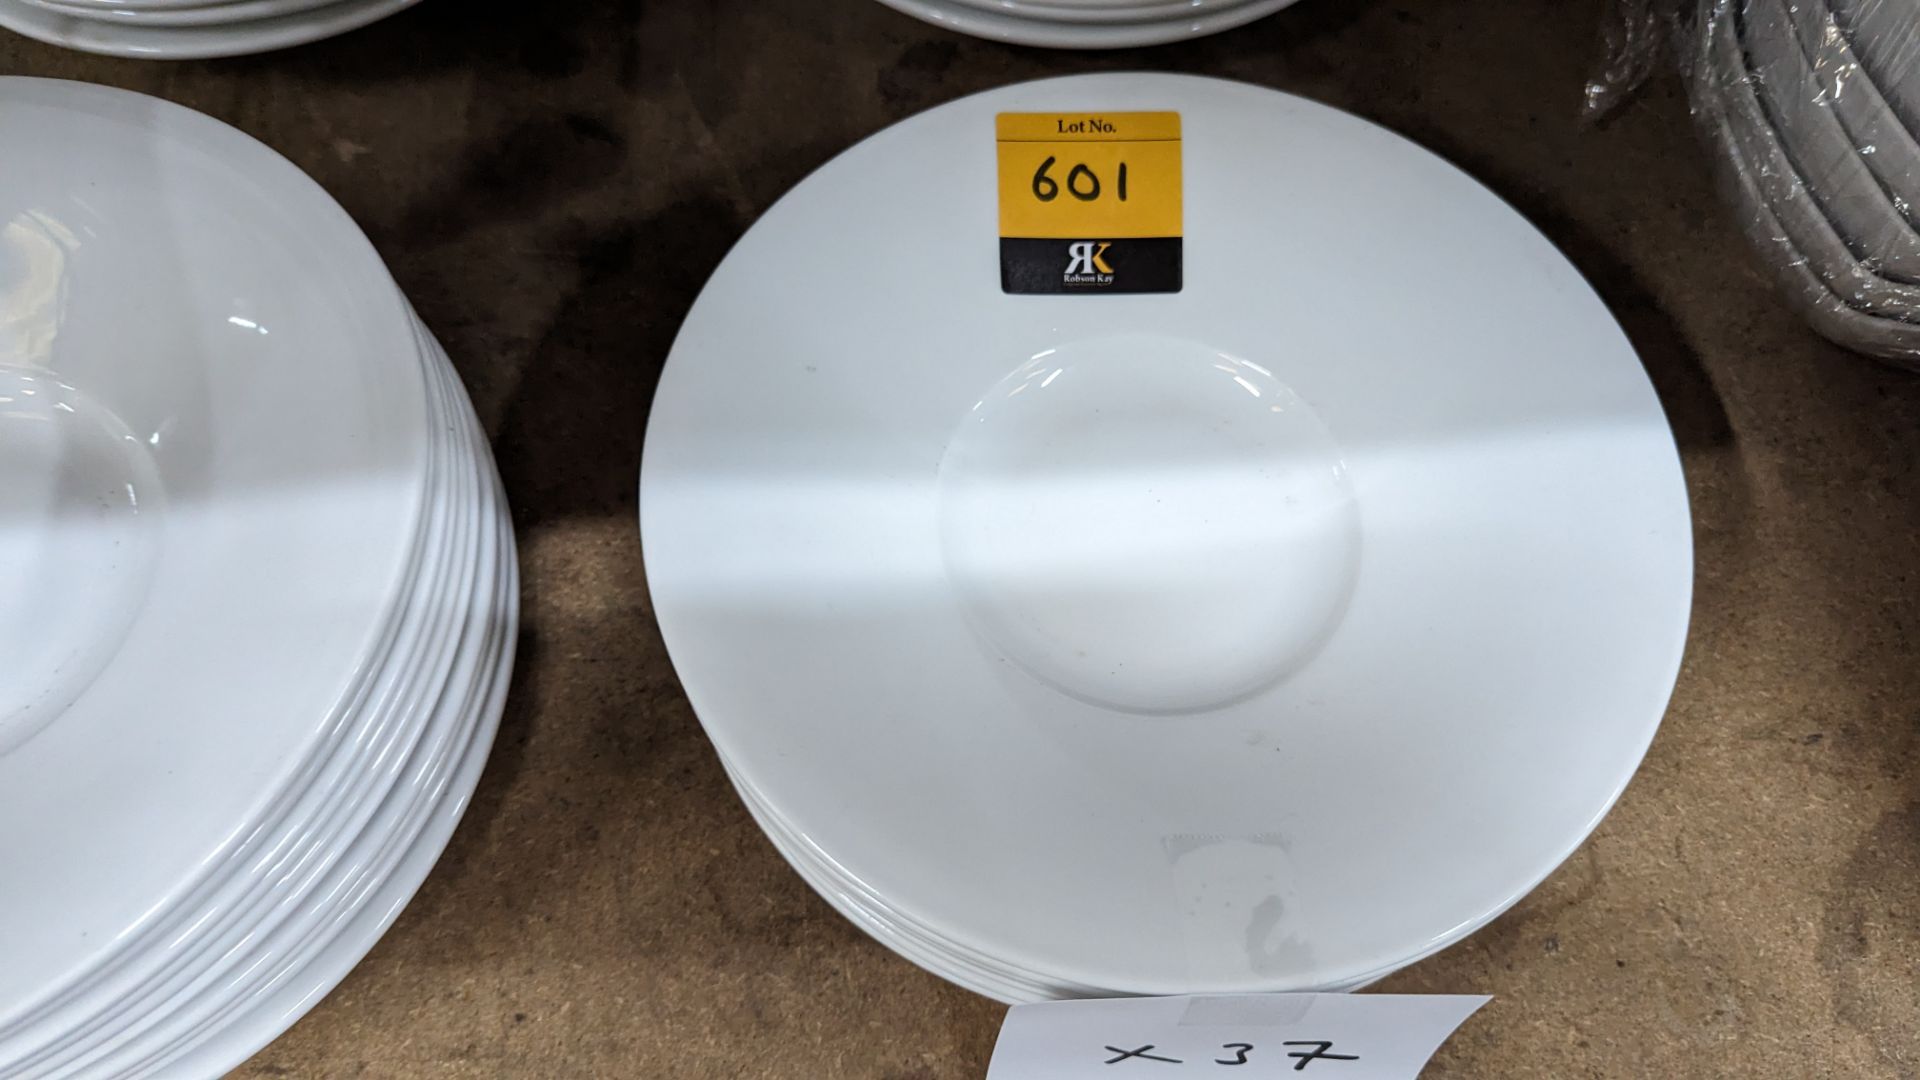 37 off Art de Cuisine 240mm bowls with recessed centres - Image 3 of 5